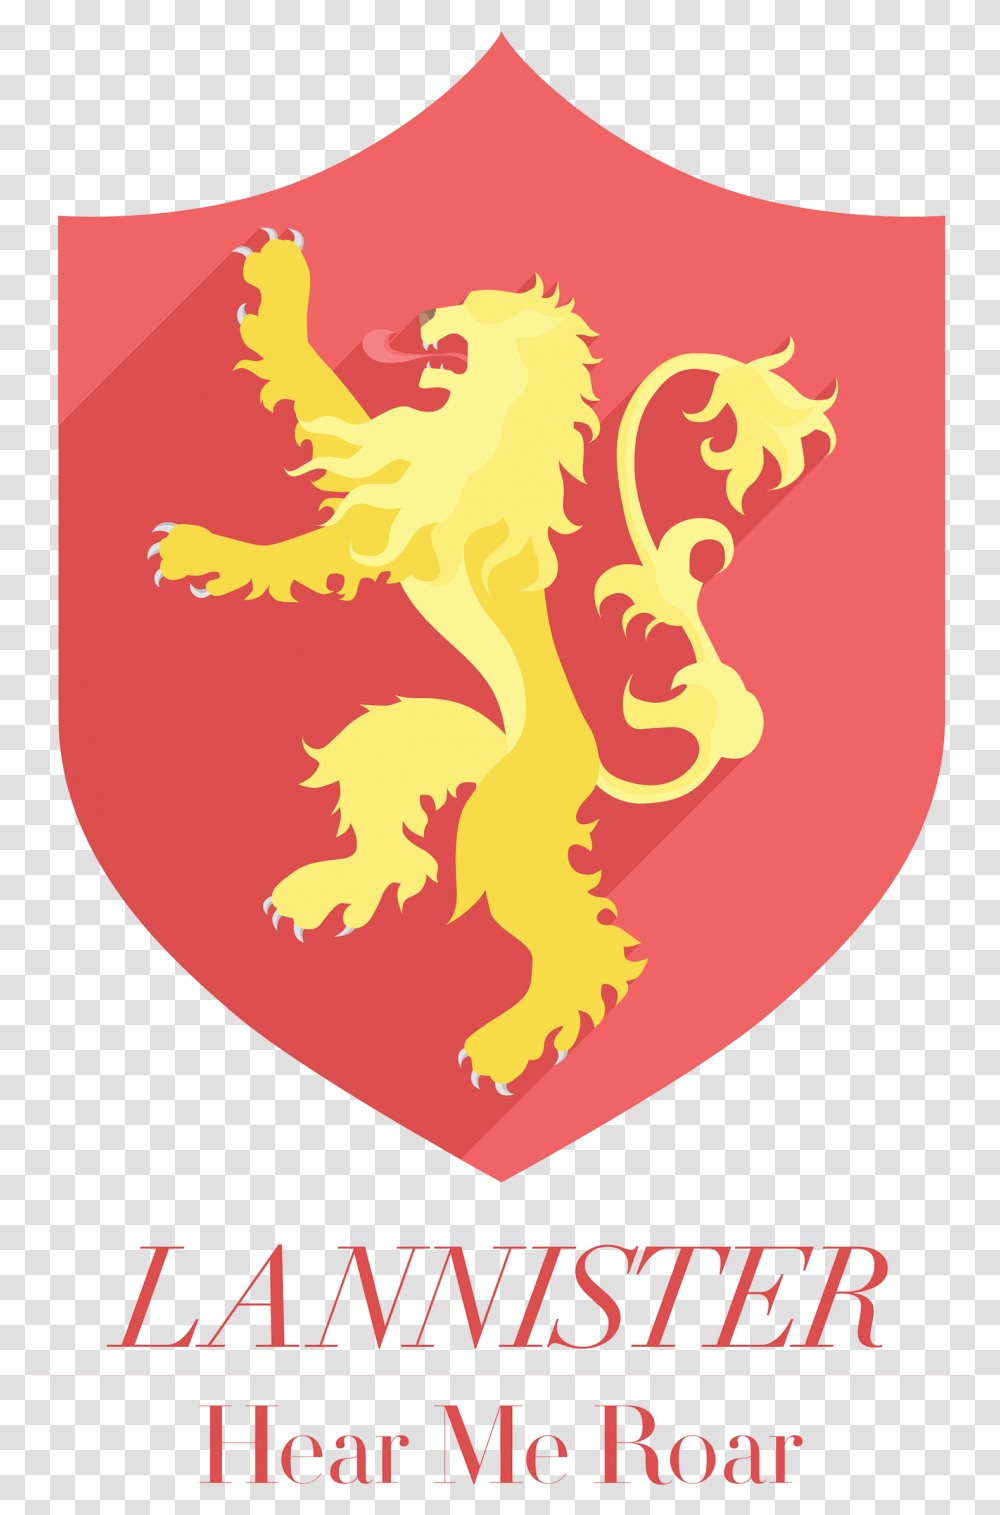 Game Of Thrones Sigils Vol Game Of Thrones House Sigils, Poster, Advertisement, Armor, Shield Transparent Png